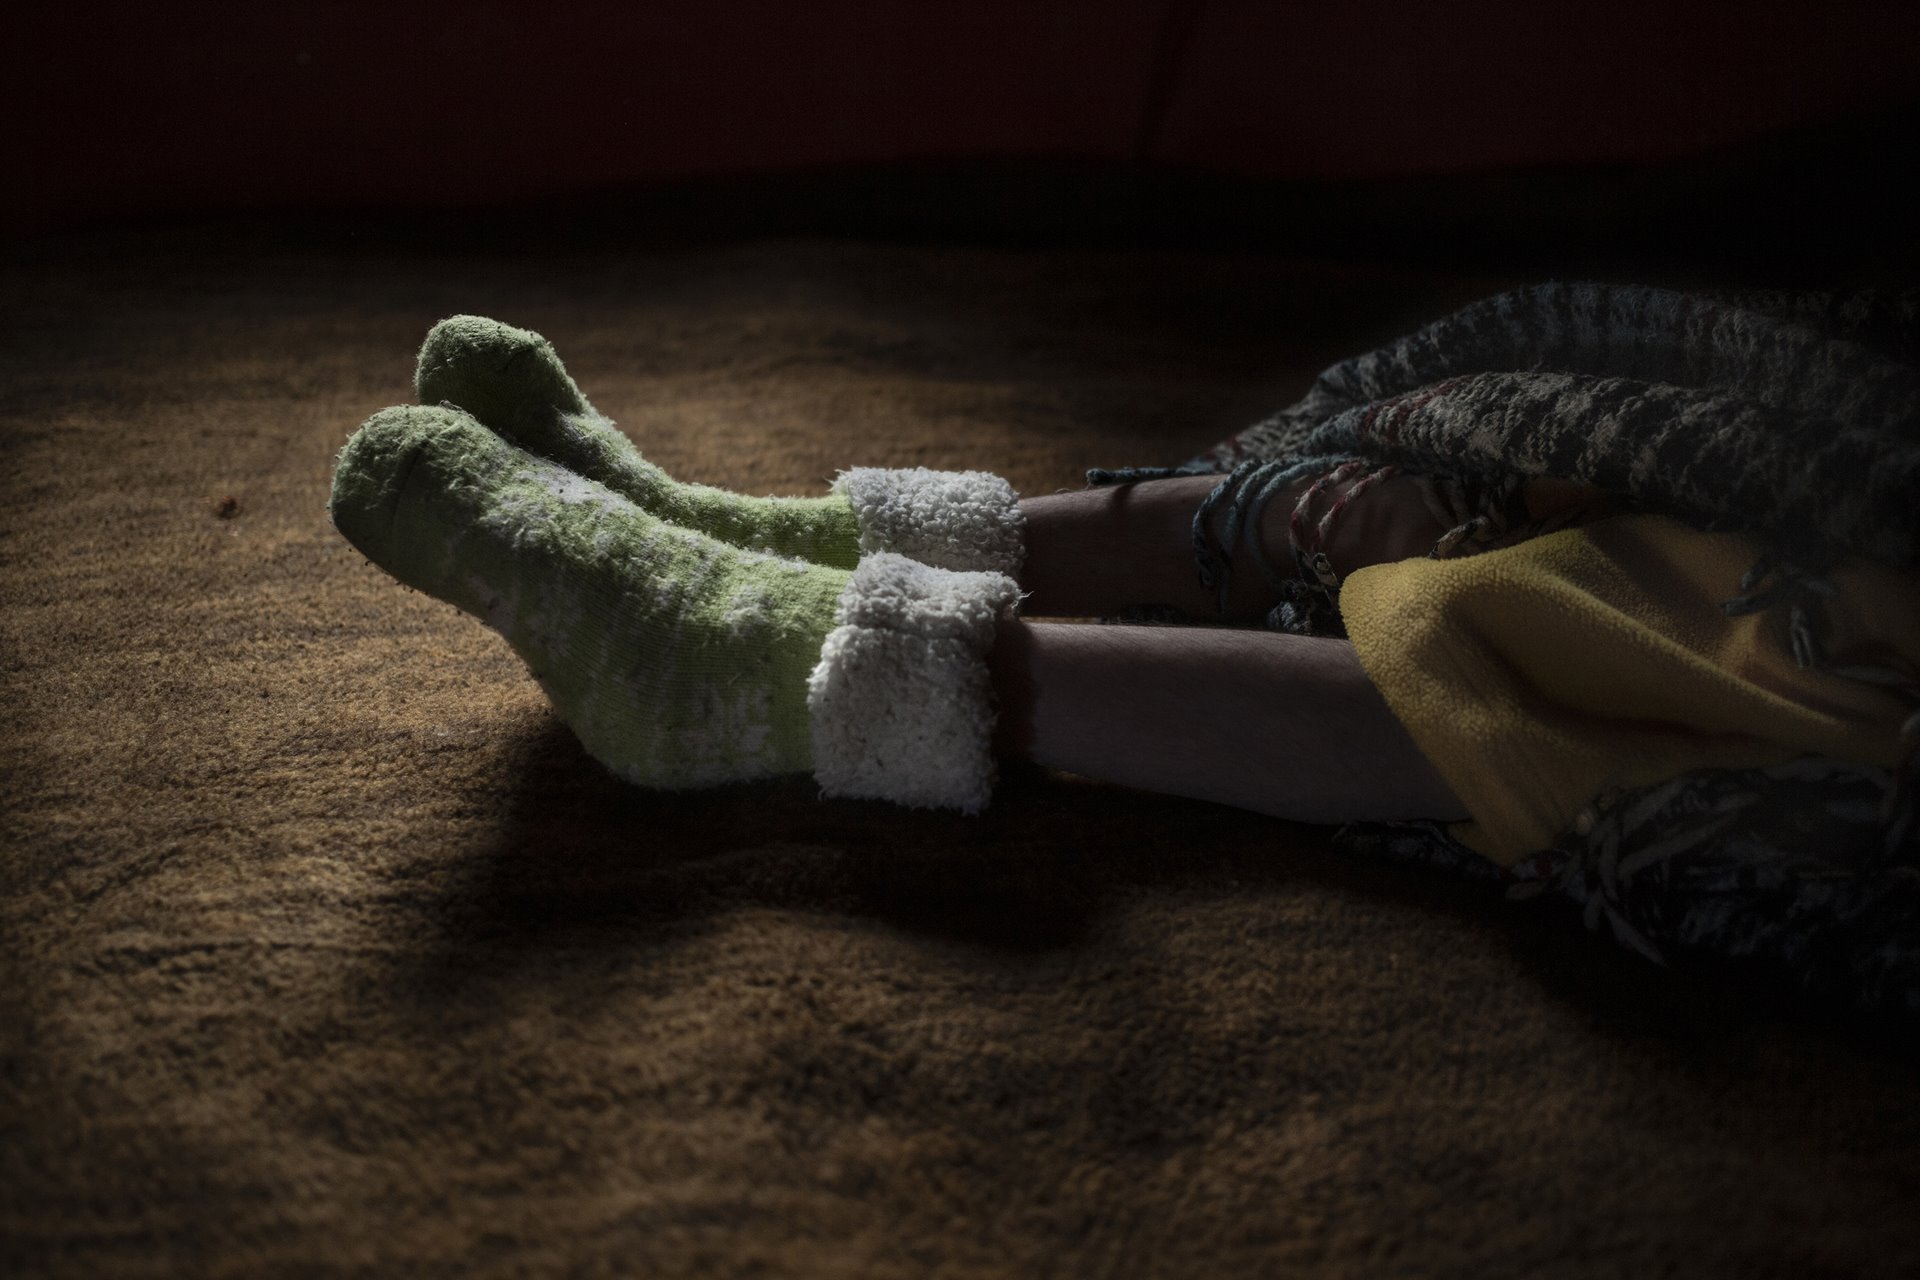 Sebastián (18), who lives with hydrocephalus (a neurological disorder caused by a build-up of fluids in cavities within the brain) lies in bed wearing socks his mother, Doña Petra, has put on him to keep his feet warm, in Villa Guerrero, Mexico. Sebastián depends on his parents for most daily activities.